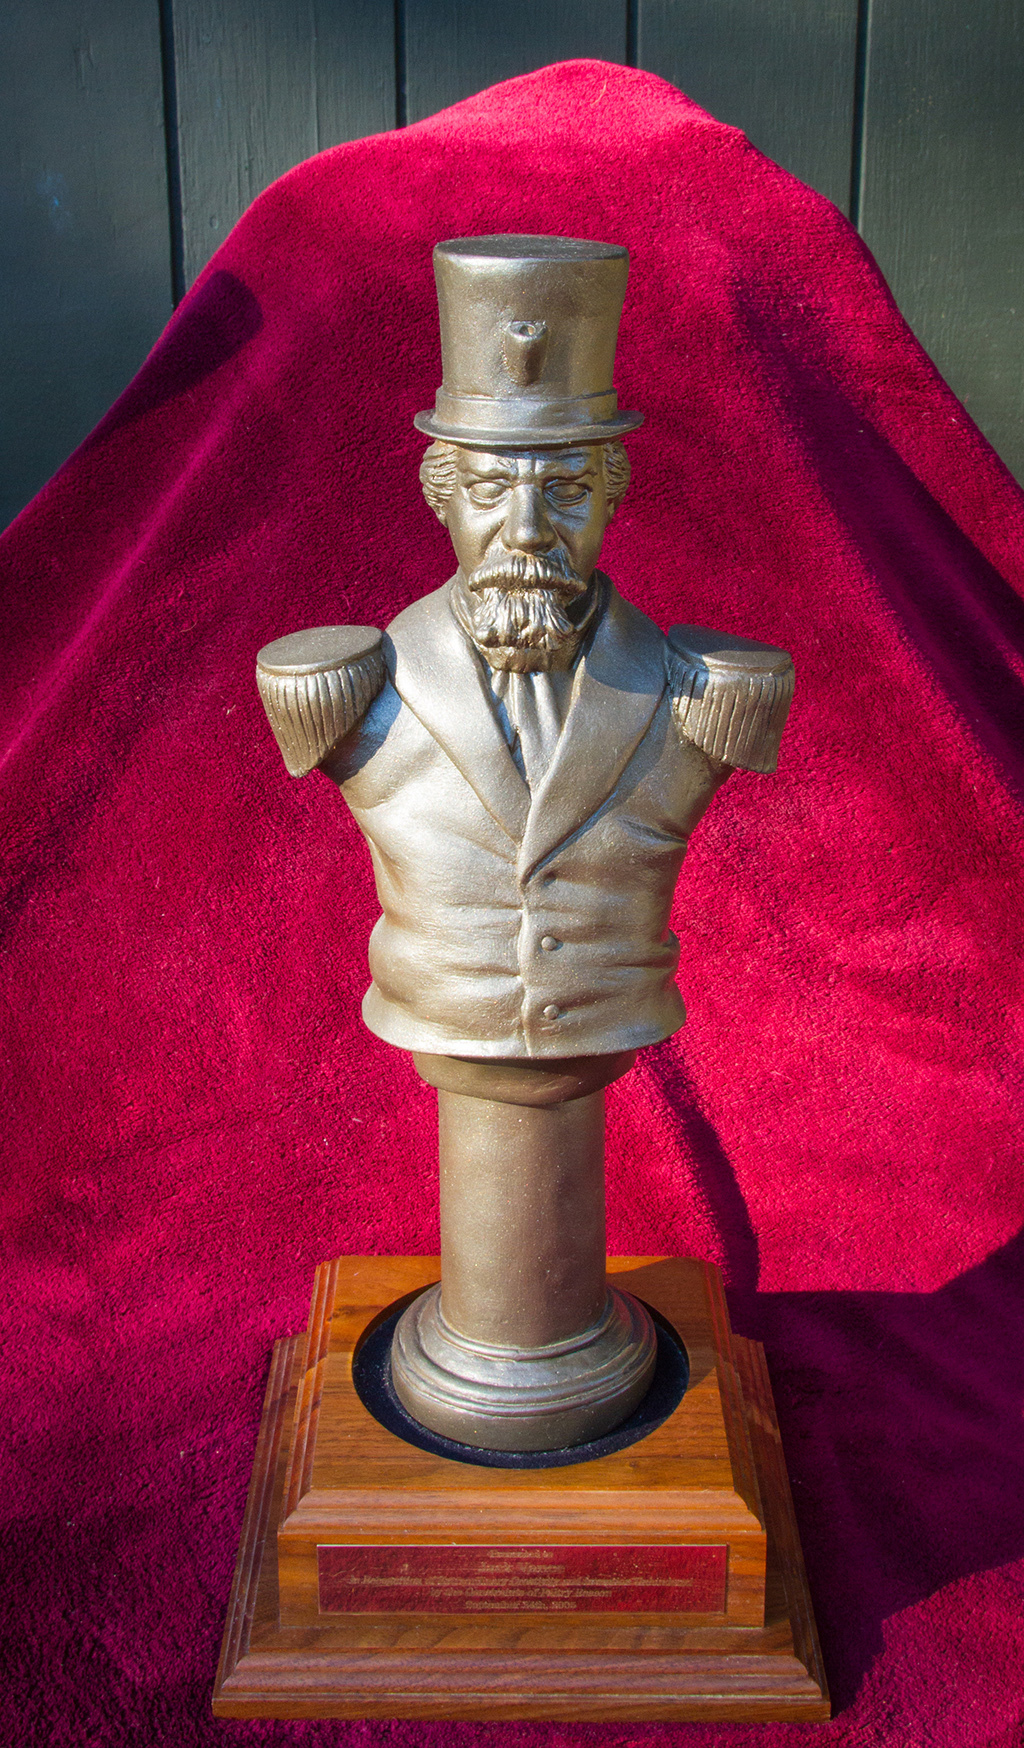   The  Emperor Norton Award , known as "the Joshua,"&nbsp;originally designed and sculpted in 2003 by Paul Groendes.  Created by Tachyon Publications and Borderland Books, two of these Awards were presented annually from 2003 to 2011 to honor works o